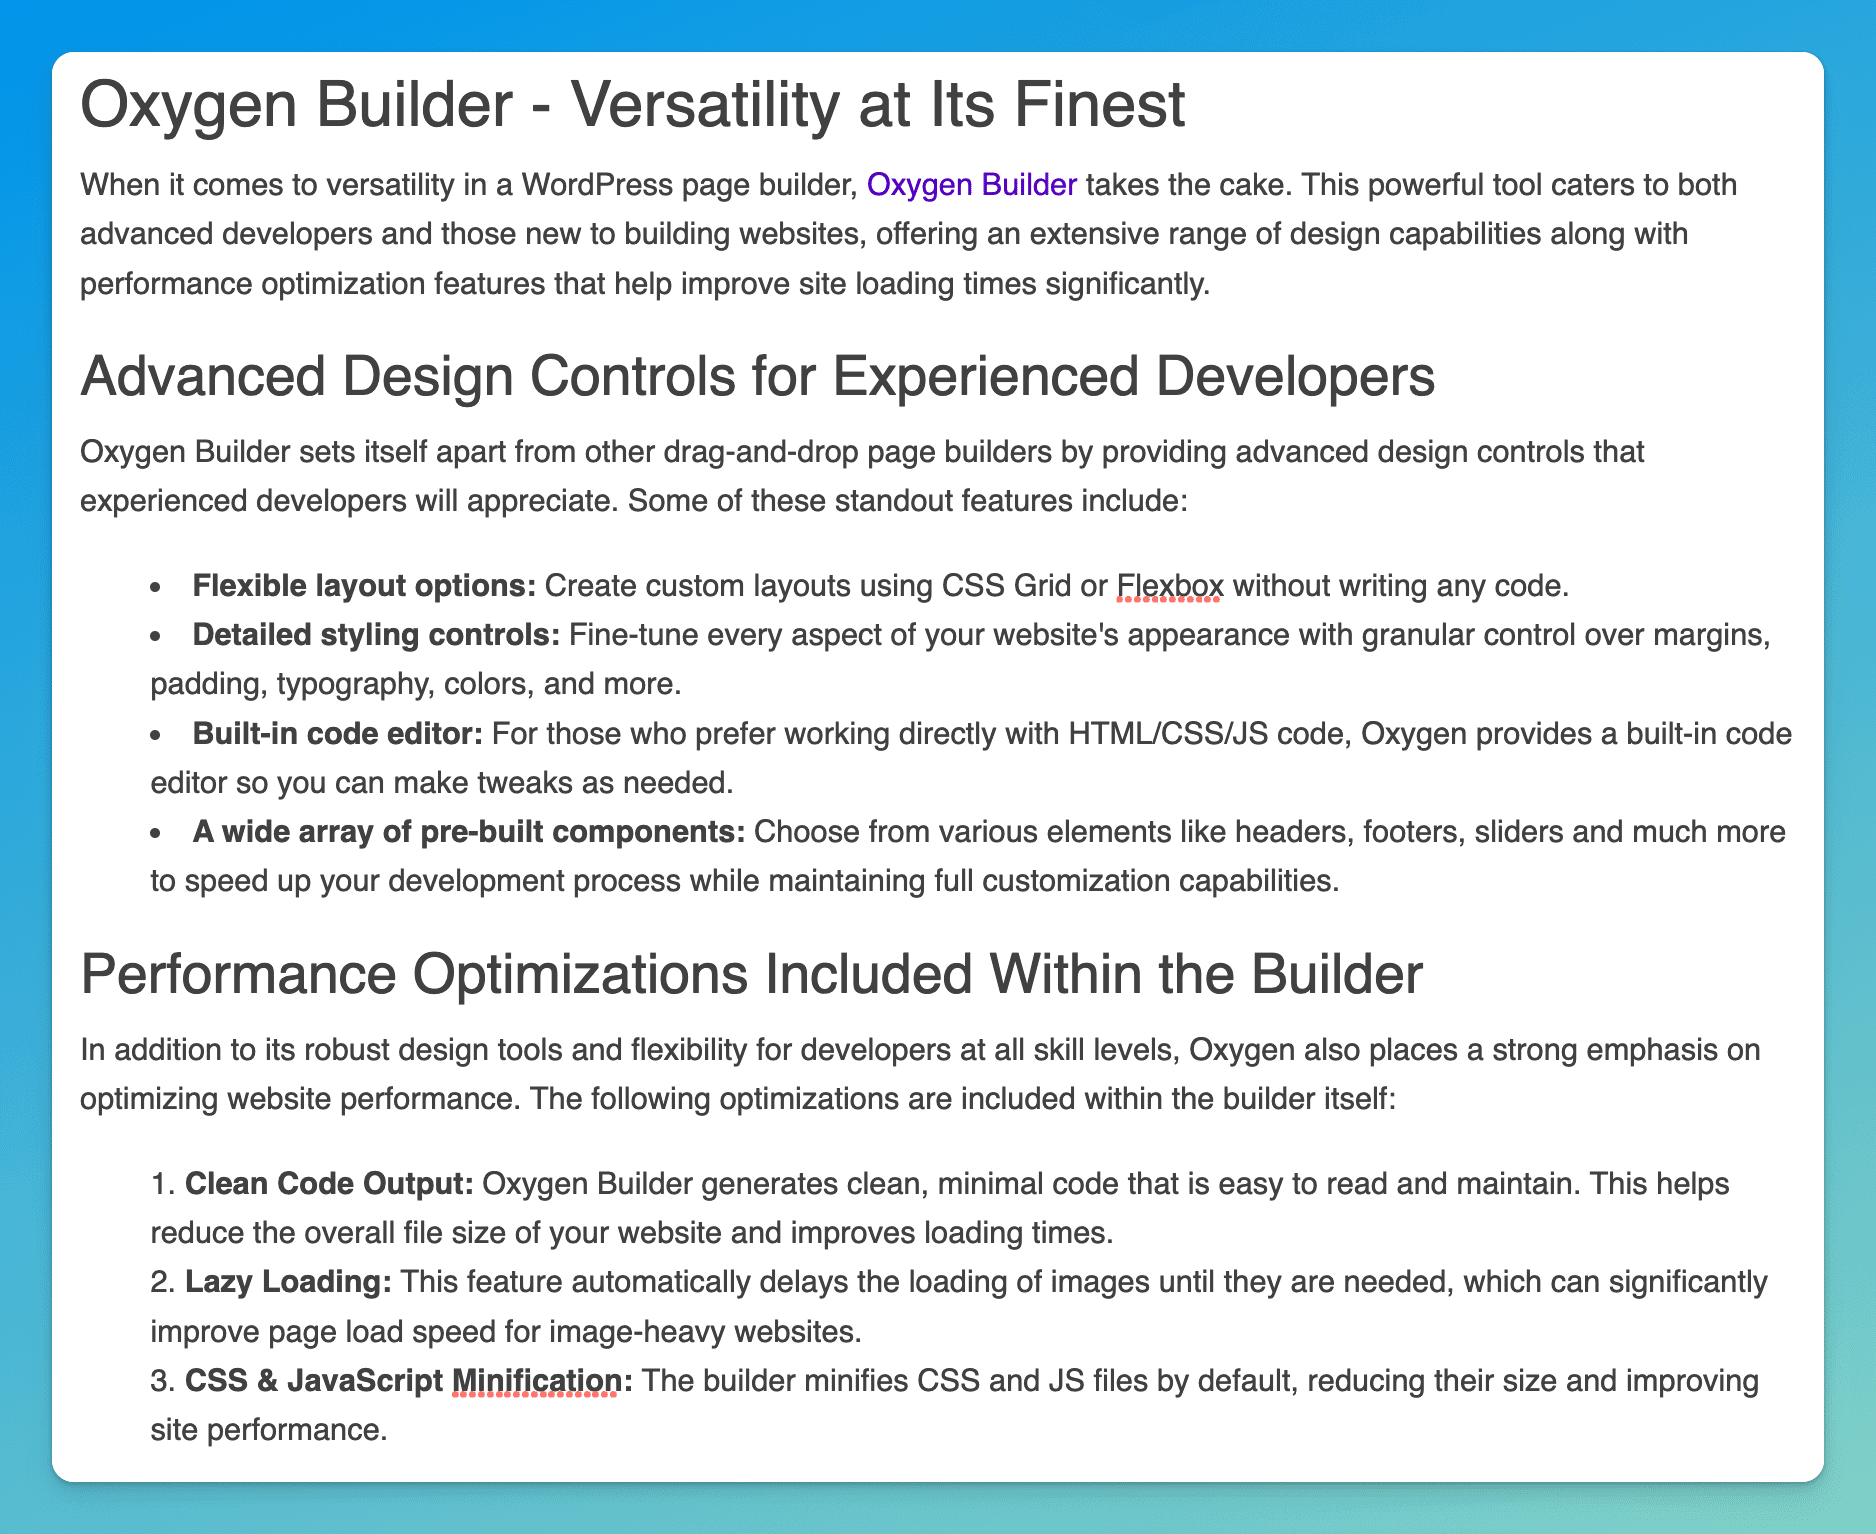 A section on Oxygen Builder, detailing features and optimizations included in purchasing the product at a fairly in depth scale.